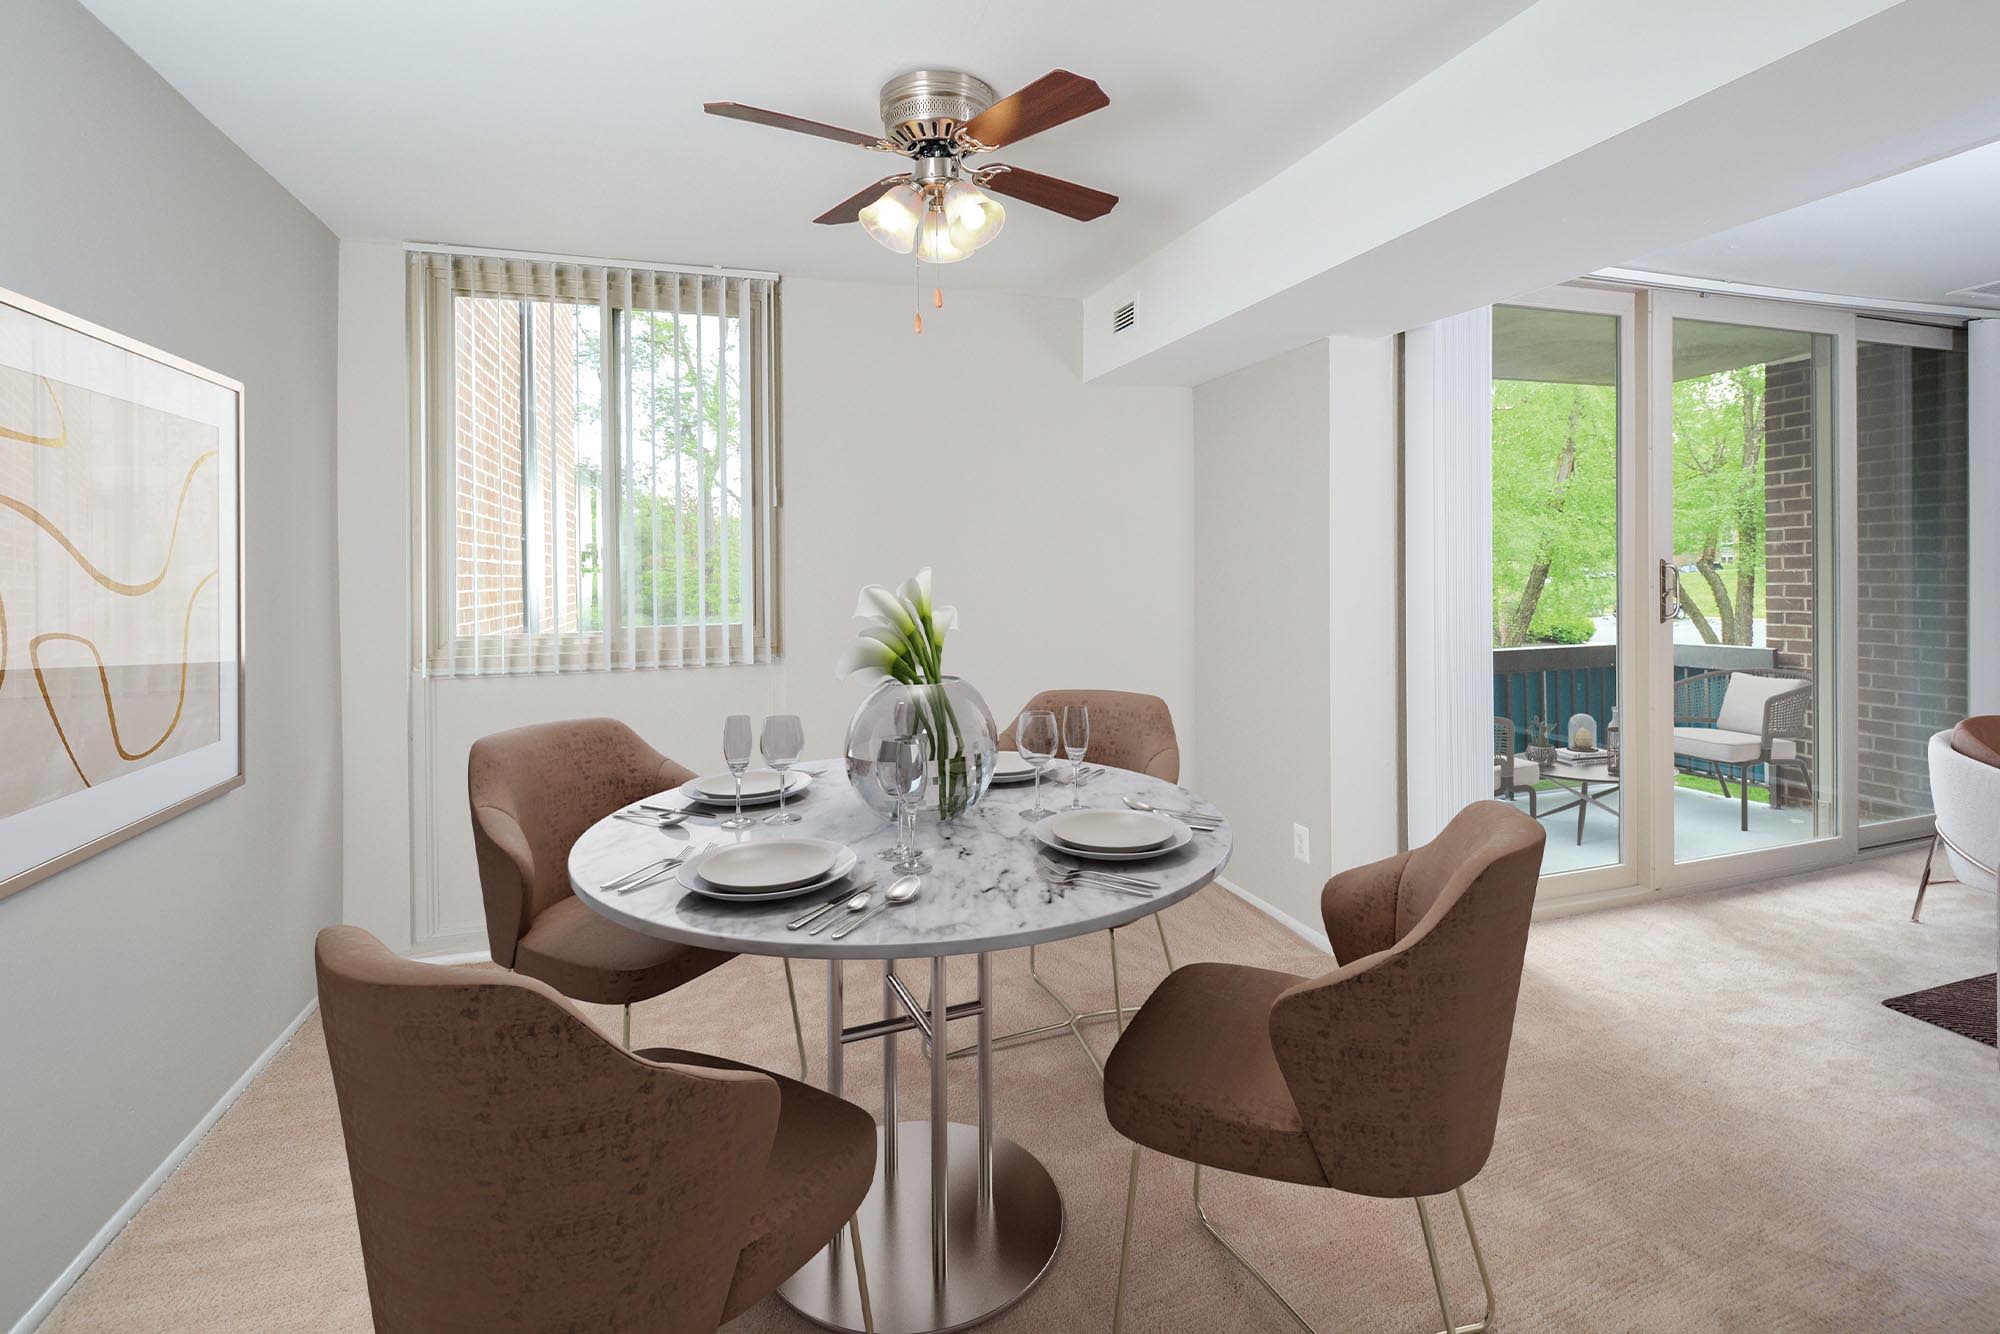 Dining area with a ceiling fan in a model apartment home at Landmark Glenmont Station in Silver Spring, Maryland